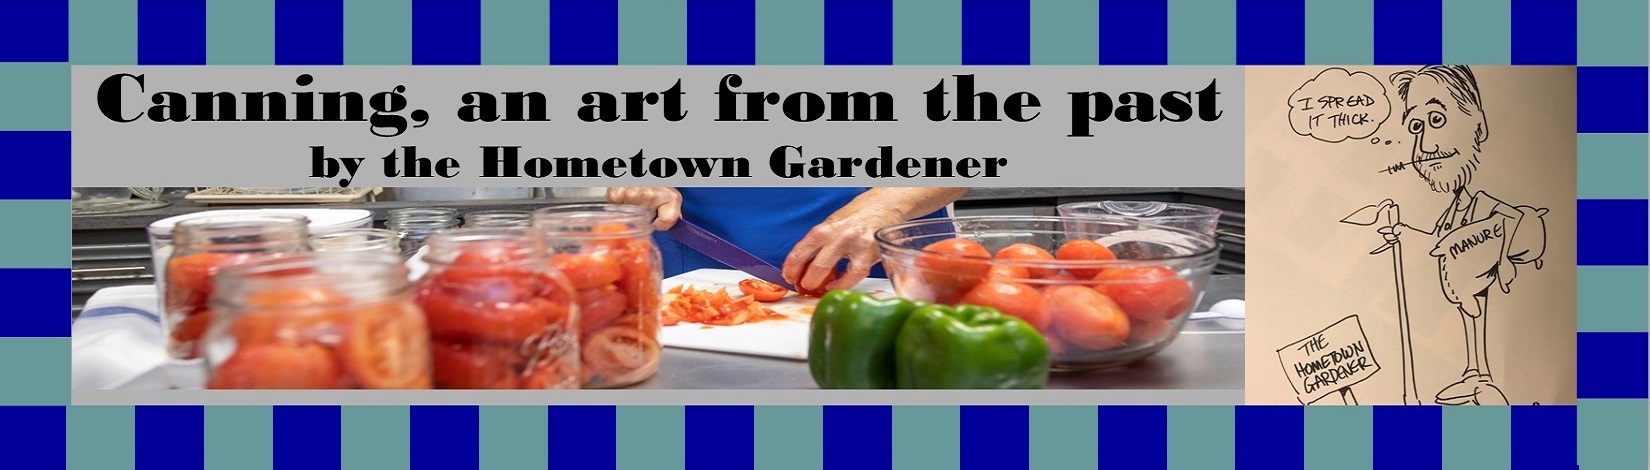 THE ART OF FOOD PRESERVATION